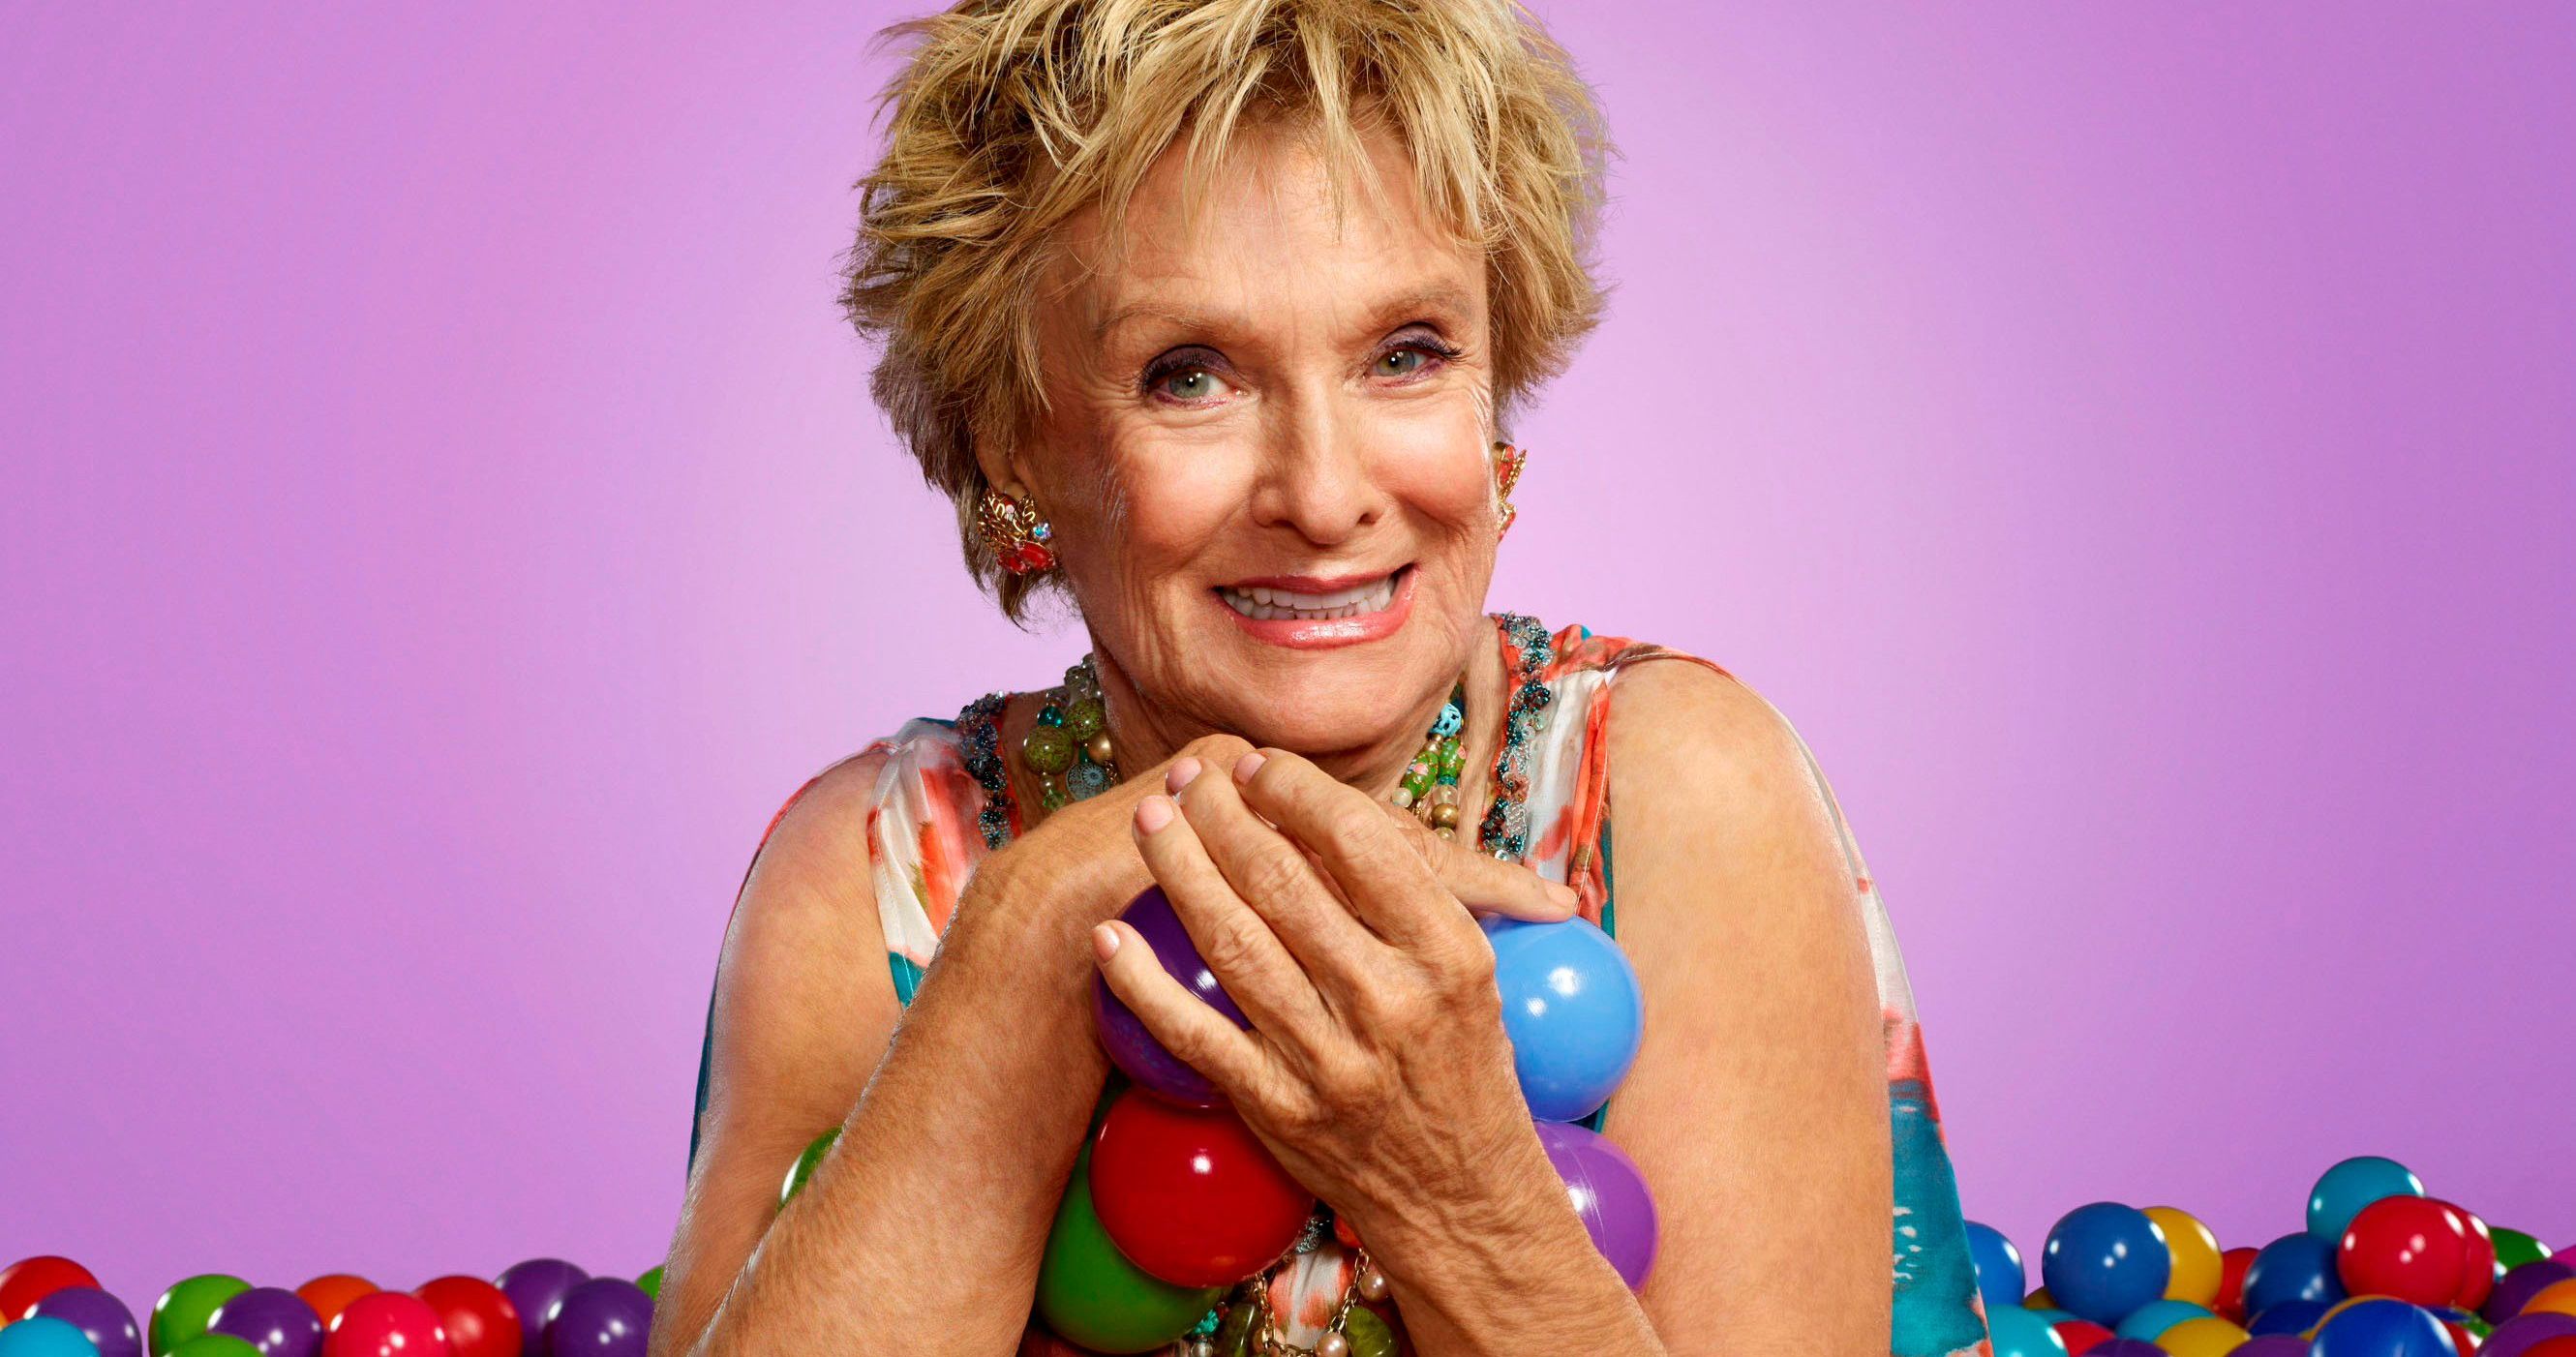 Cloris Leachman Dies, Iconic Oscar and Emmy Winning Actress Was 94